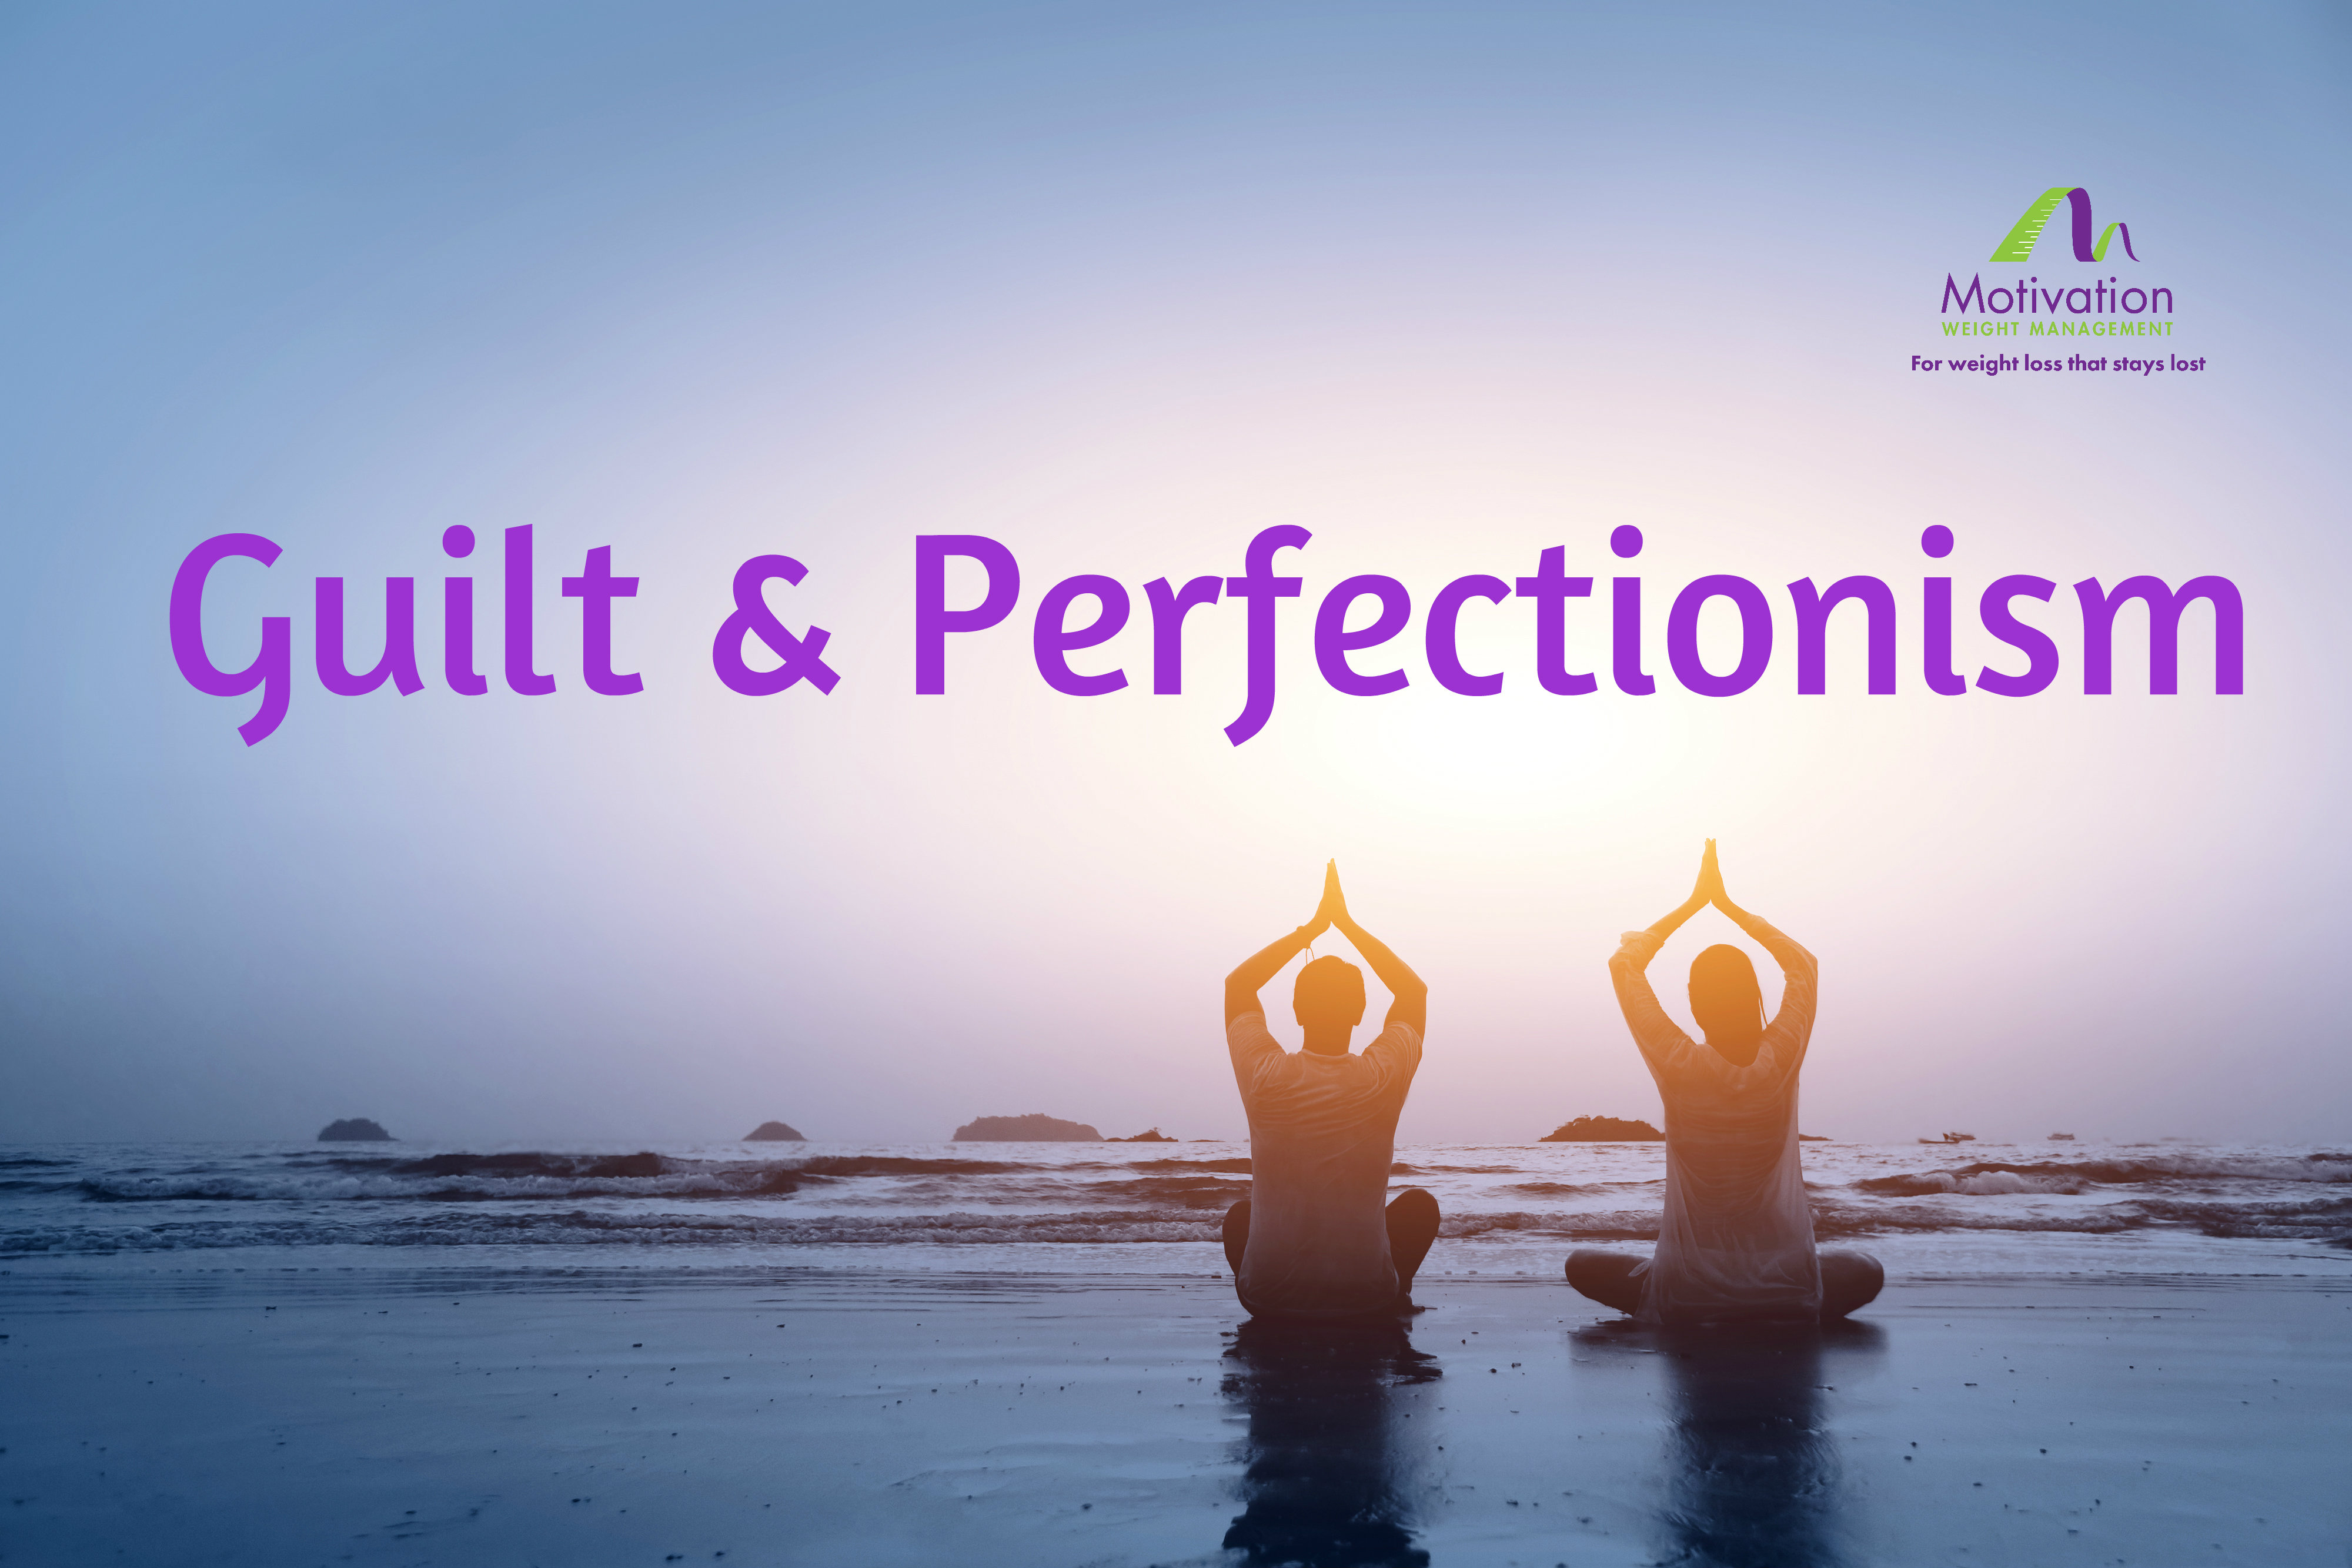 Day 15 Guilt & Perfectionism